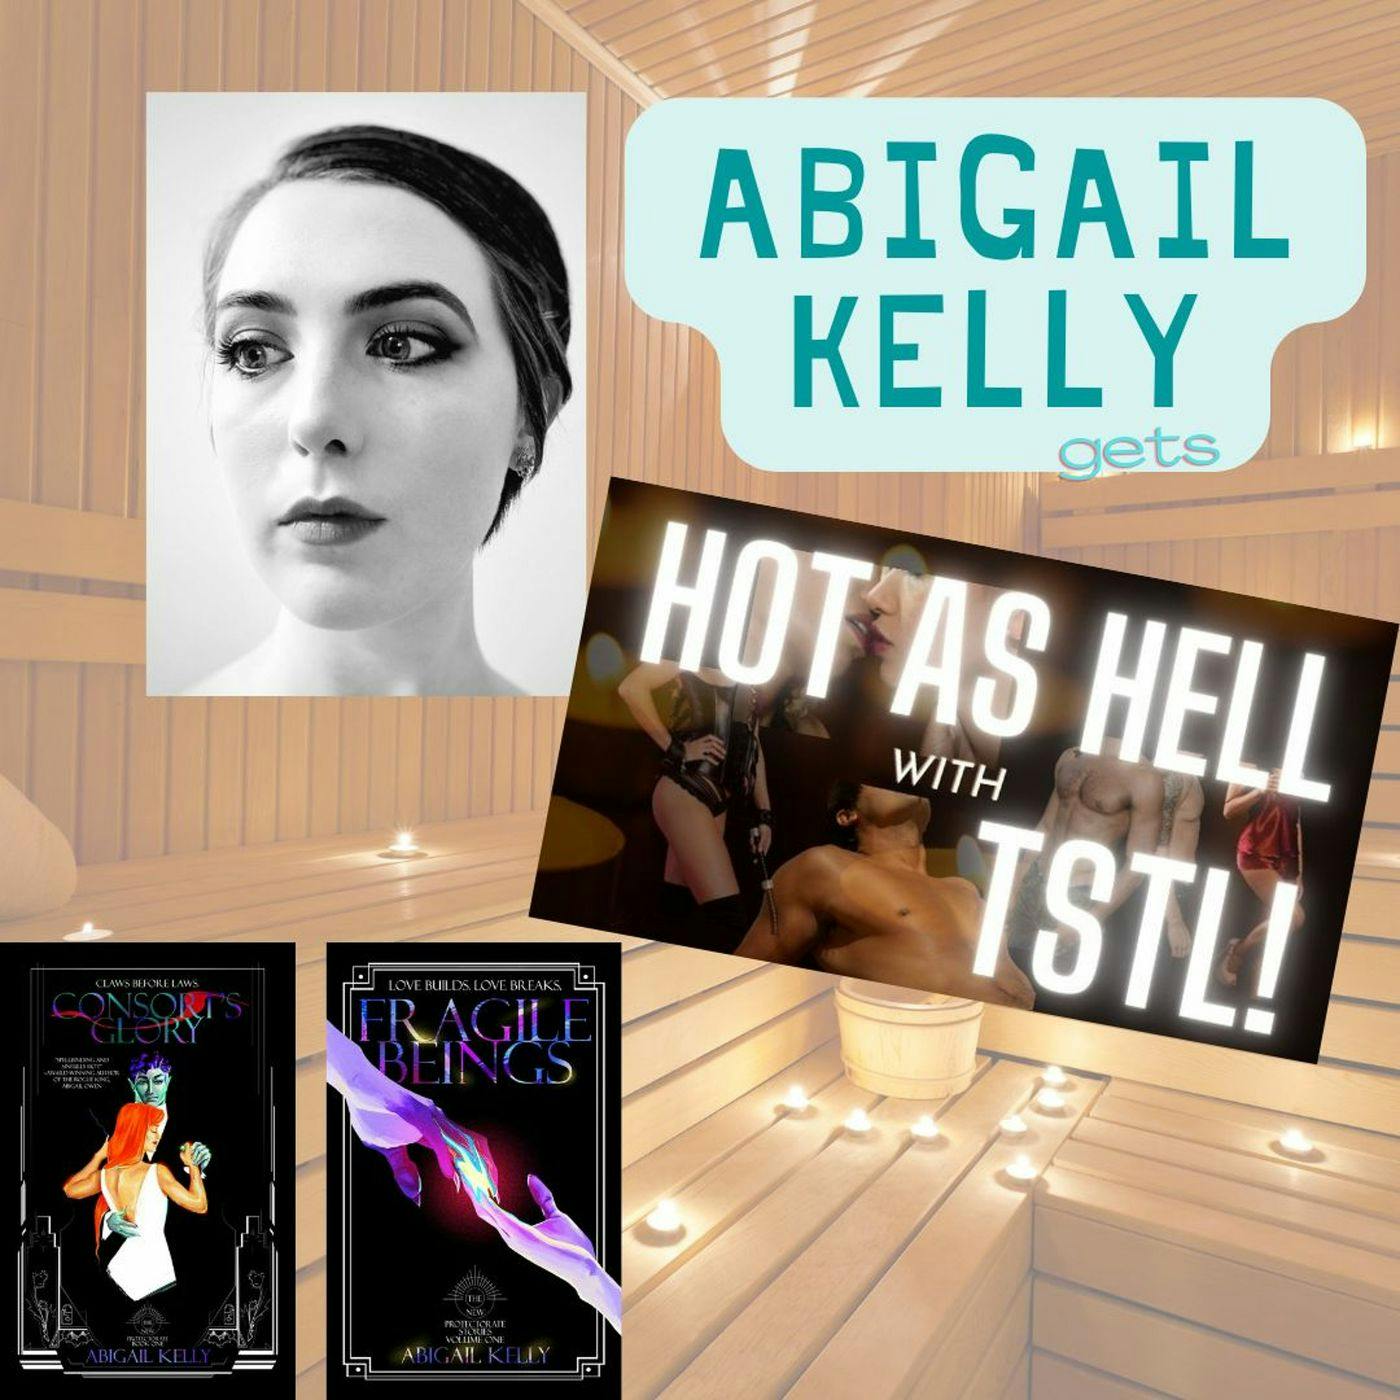 ABIGAIL KELLY gets HOT AS HELL with TSTL